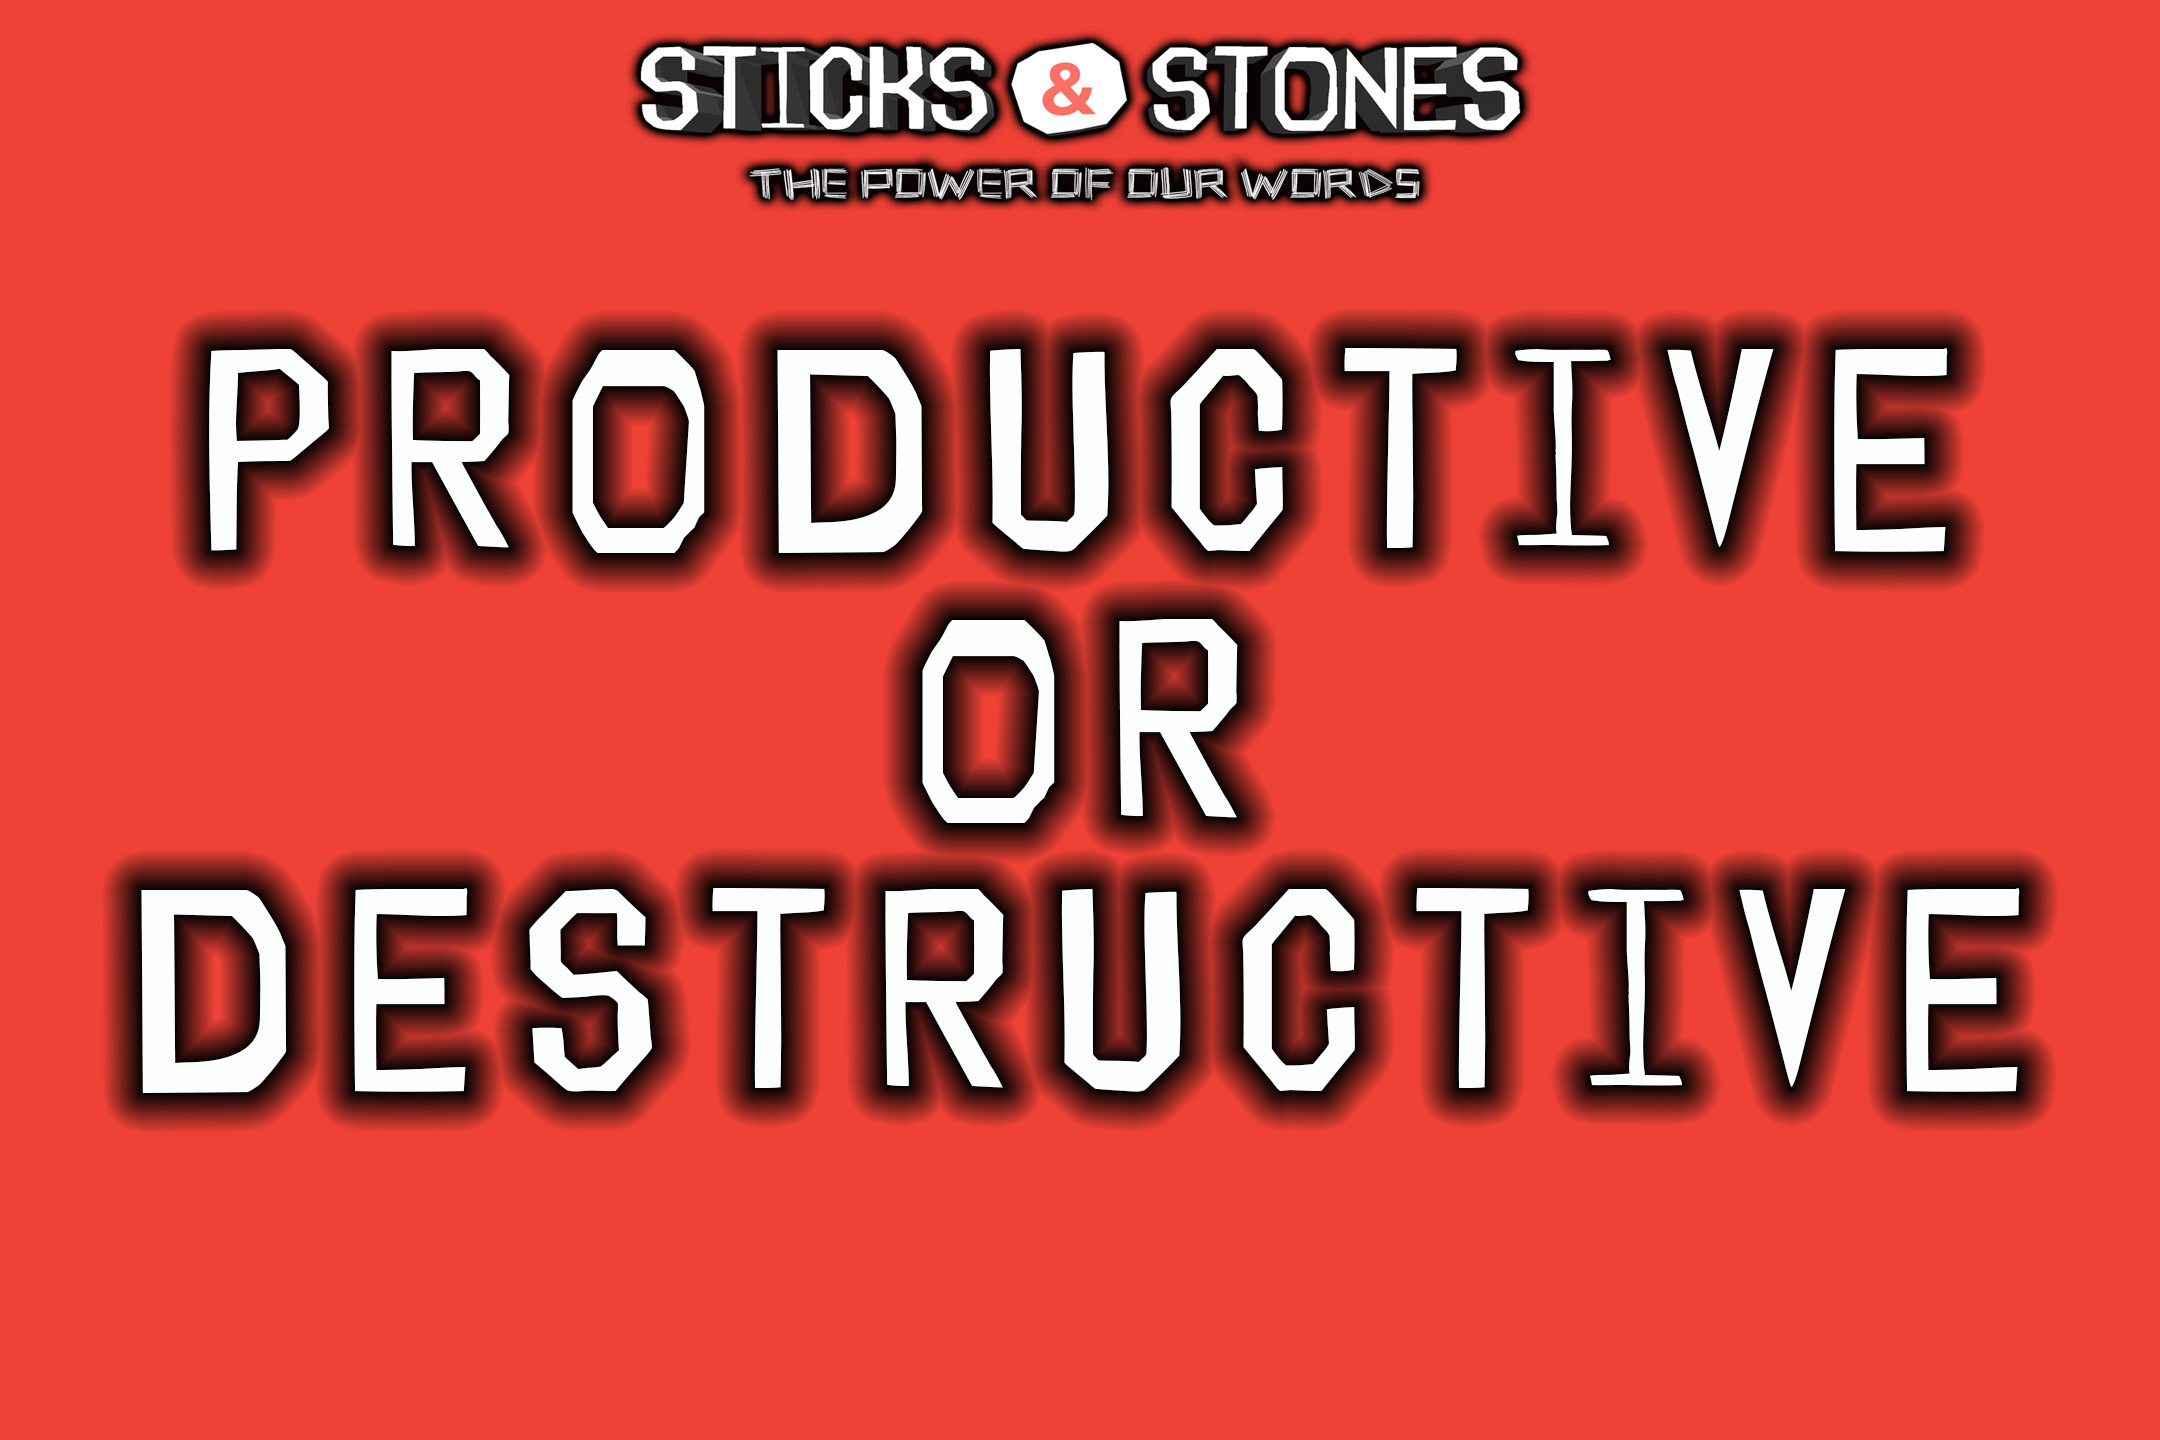 Pastor Huey: Sticks and Stones- The Power of Our Words | Productive or Destructive (11/08/15)